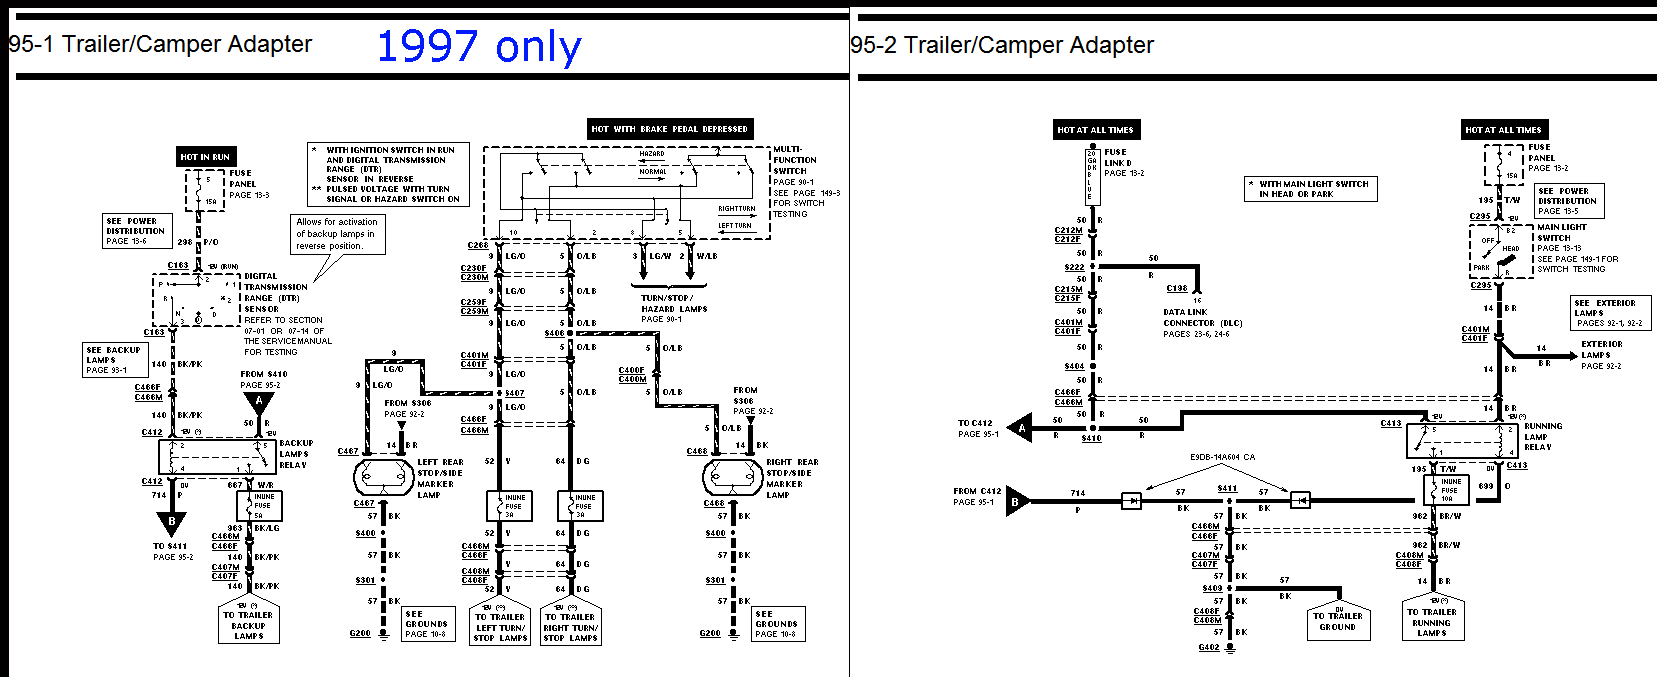 Ford F250 Trailer Wiring Diagram from asavage.dyndns.org